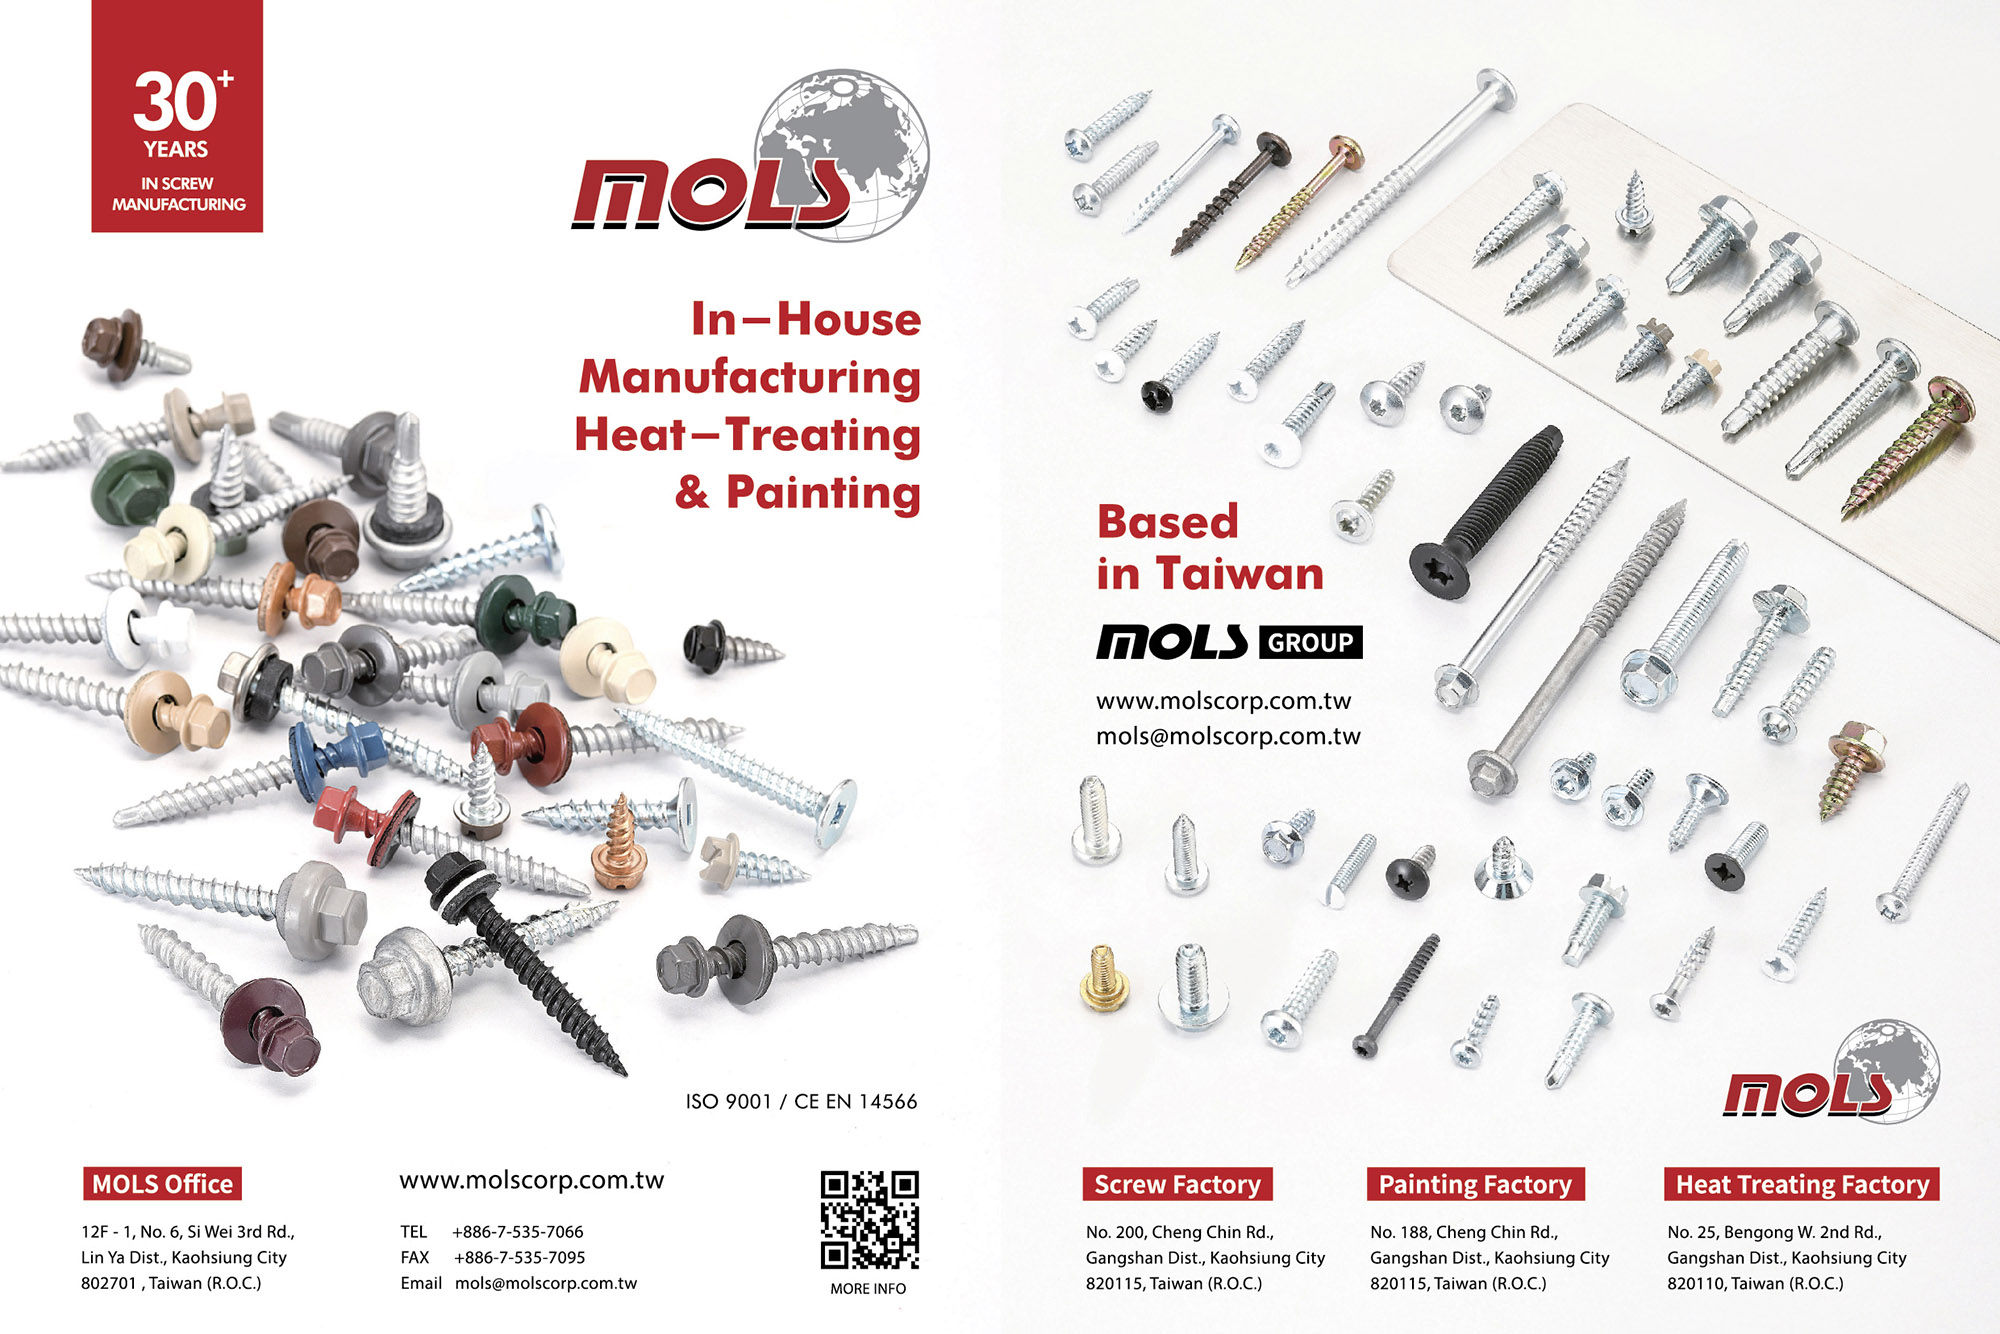 MOLS CORPORATION  , In-House Manufacturing Heat-Treating & Painting